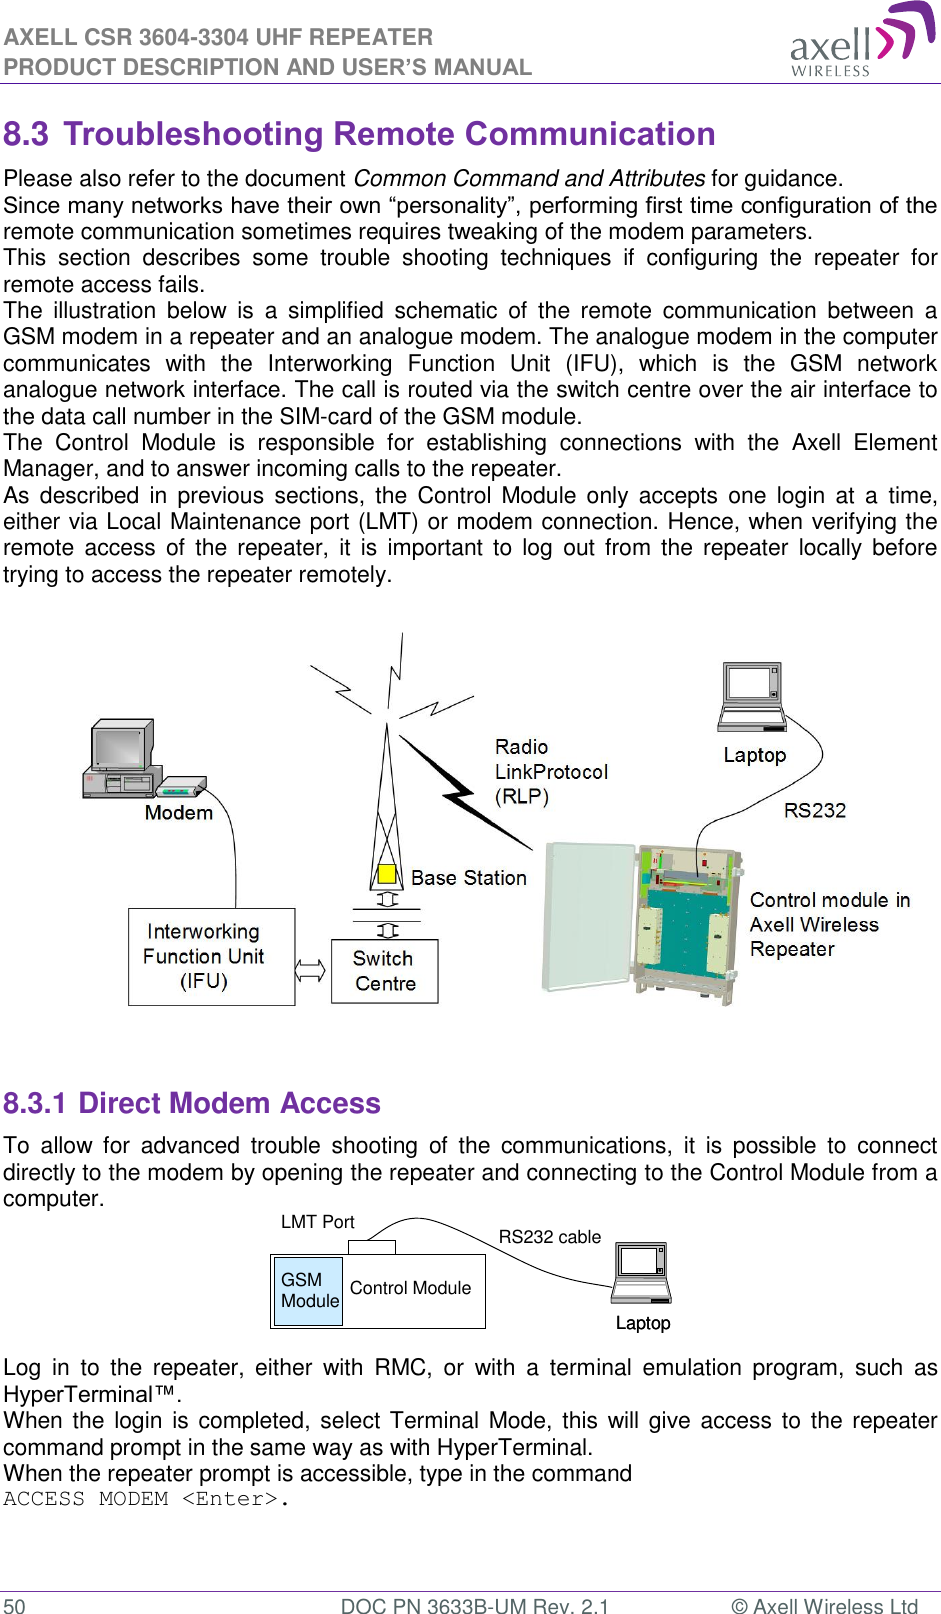 AXELL CSR 3604-3304 UHF REPEATER PRODUCT DESCRIPTION AND USER’S MANUAL  50  DOC PN 3633B-UM Rev. 2.1  © Axell Wireless Ltd  LaptopLaptopRS232 cableControl ModuleGSM ModuleLMT Port8.3 Troubleshooting Remote Communication Please also refer to the document Common Command and Attributes for guidance.  Since many networks have their own “personality”, performing first time configuration of the remote communication sometimes requires tweaking of the modem parameters. This  section  describes  some  trouble  shooting  techniques  if  configuring  the  repeater  for remote access fails.  The  illustration  below  is  a  simplified  schematic  of  the  remote  communication  between  a GSM modem in a repeater and an analogue modem. The analogue modem in the computer communicates  with  the  Interworking  Function  Unit  (IFU),  which  is  the  GSM  network analogue network interface. The call is routed via the switch centre over the air interface to the data call number in the SIM-card of the GSM module. The  Control  Module  is  responsible  for  establishing  connections  with  the  Axell  Element Manager, and to answer incoming calls to the repeater.  As  described  in  previous  sections,  the  Control  Module  only  accepts  one  login  at  a  time, either via Local Maintenance port (LMT) or modem connection. Hence, when verifying the remote  access  of  the  repeater,  it  is  important to  log  out from  the  repeater  locally  before trying to access the repeater remotely.                   8.3.1 Direct Modem Access To  allow  for  advanced  trouble  shooting  of  the  communications,  it  is  possible  to  connect directly to the modem by opening the repeater and connecting to the Control Module from a computer.     Log  in  to  the  repeater,  either  with  RMC,  or  with  a  terminal  emulation  program,  such  as HyperTerminal™.  When the  login is completed,  select Terminal Mode, this will give access to  the repeater command prompt in the same way as with HyperTerminal. When the repeater prompt is accessible, type in the command  ACCESS MODEM &lt;Enter&gt;.    